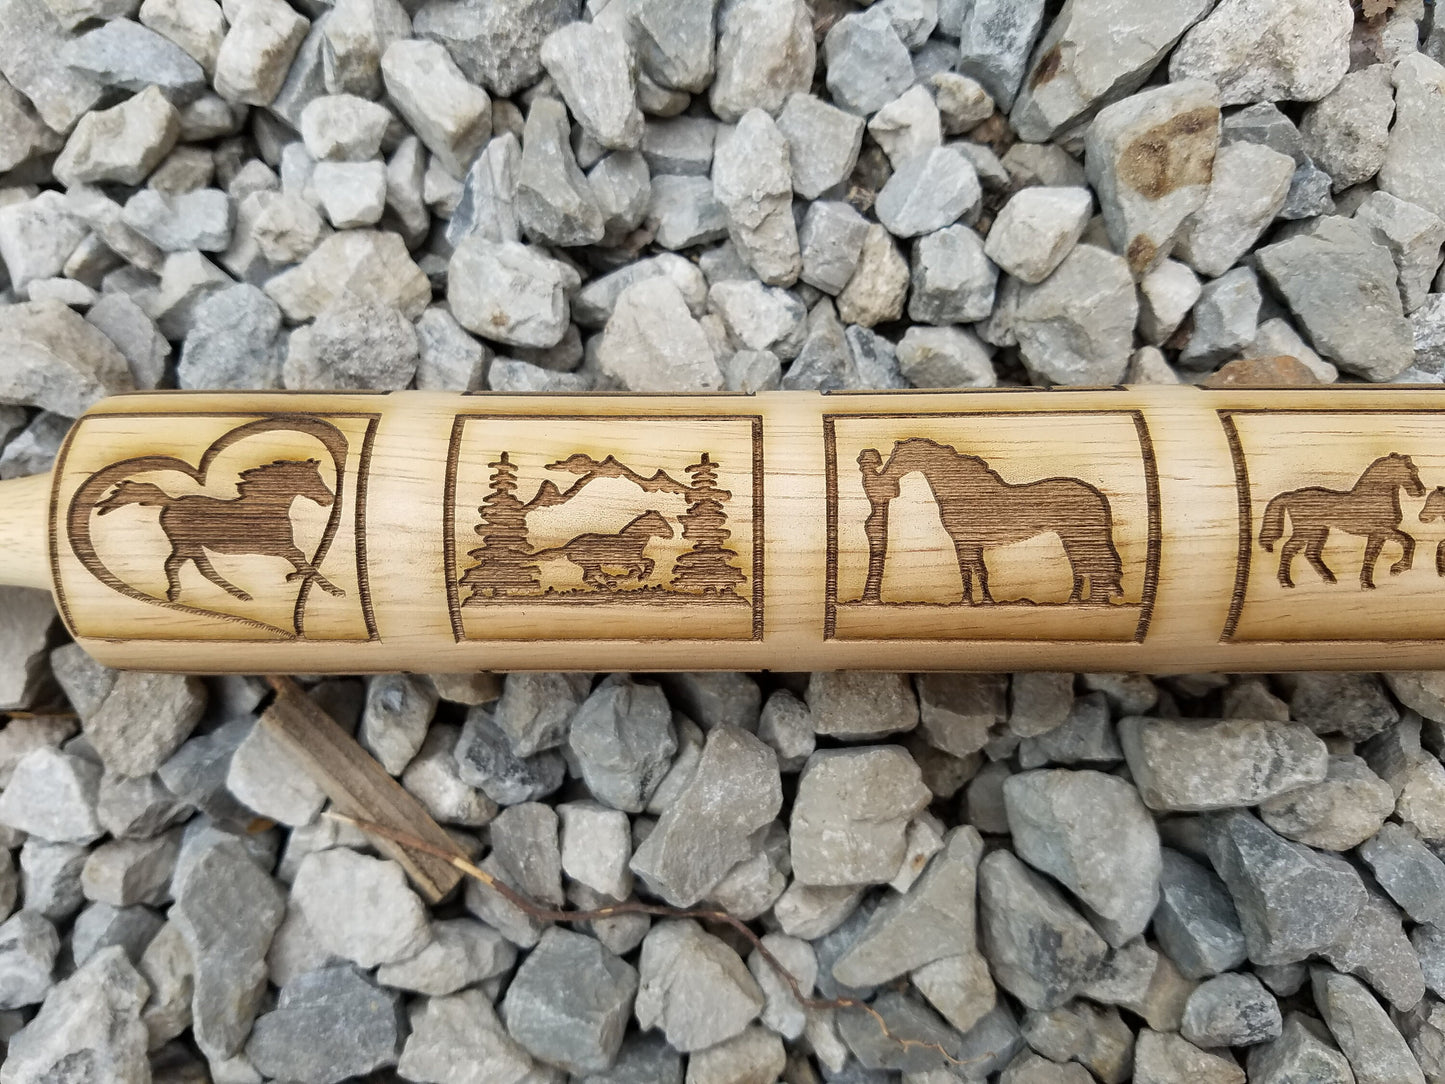 Horse, Girl, Horses, Equine, Heart, Love, Press, Stamp,Texture, 10 Inch Rolling Pin, Pie Crust, Gift, Embossed, Engraved, Wood, pottery